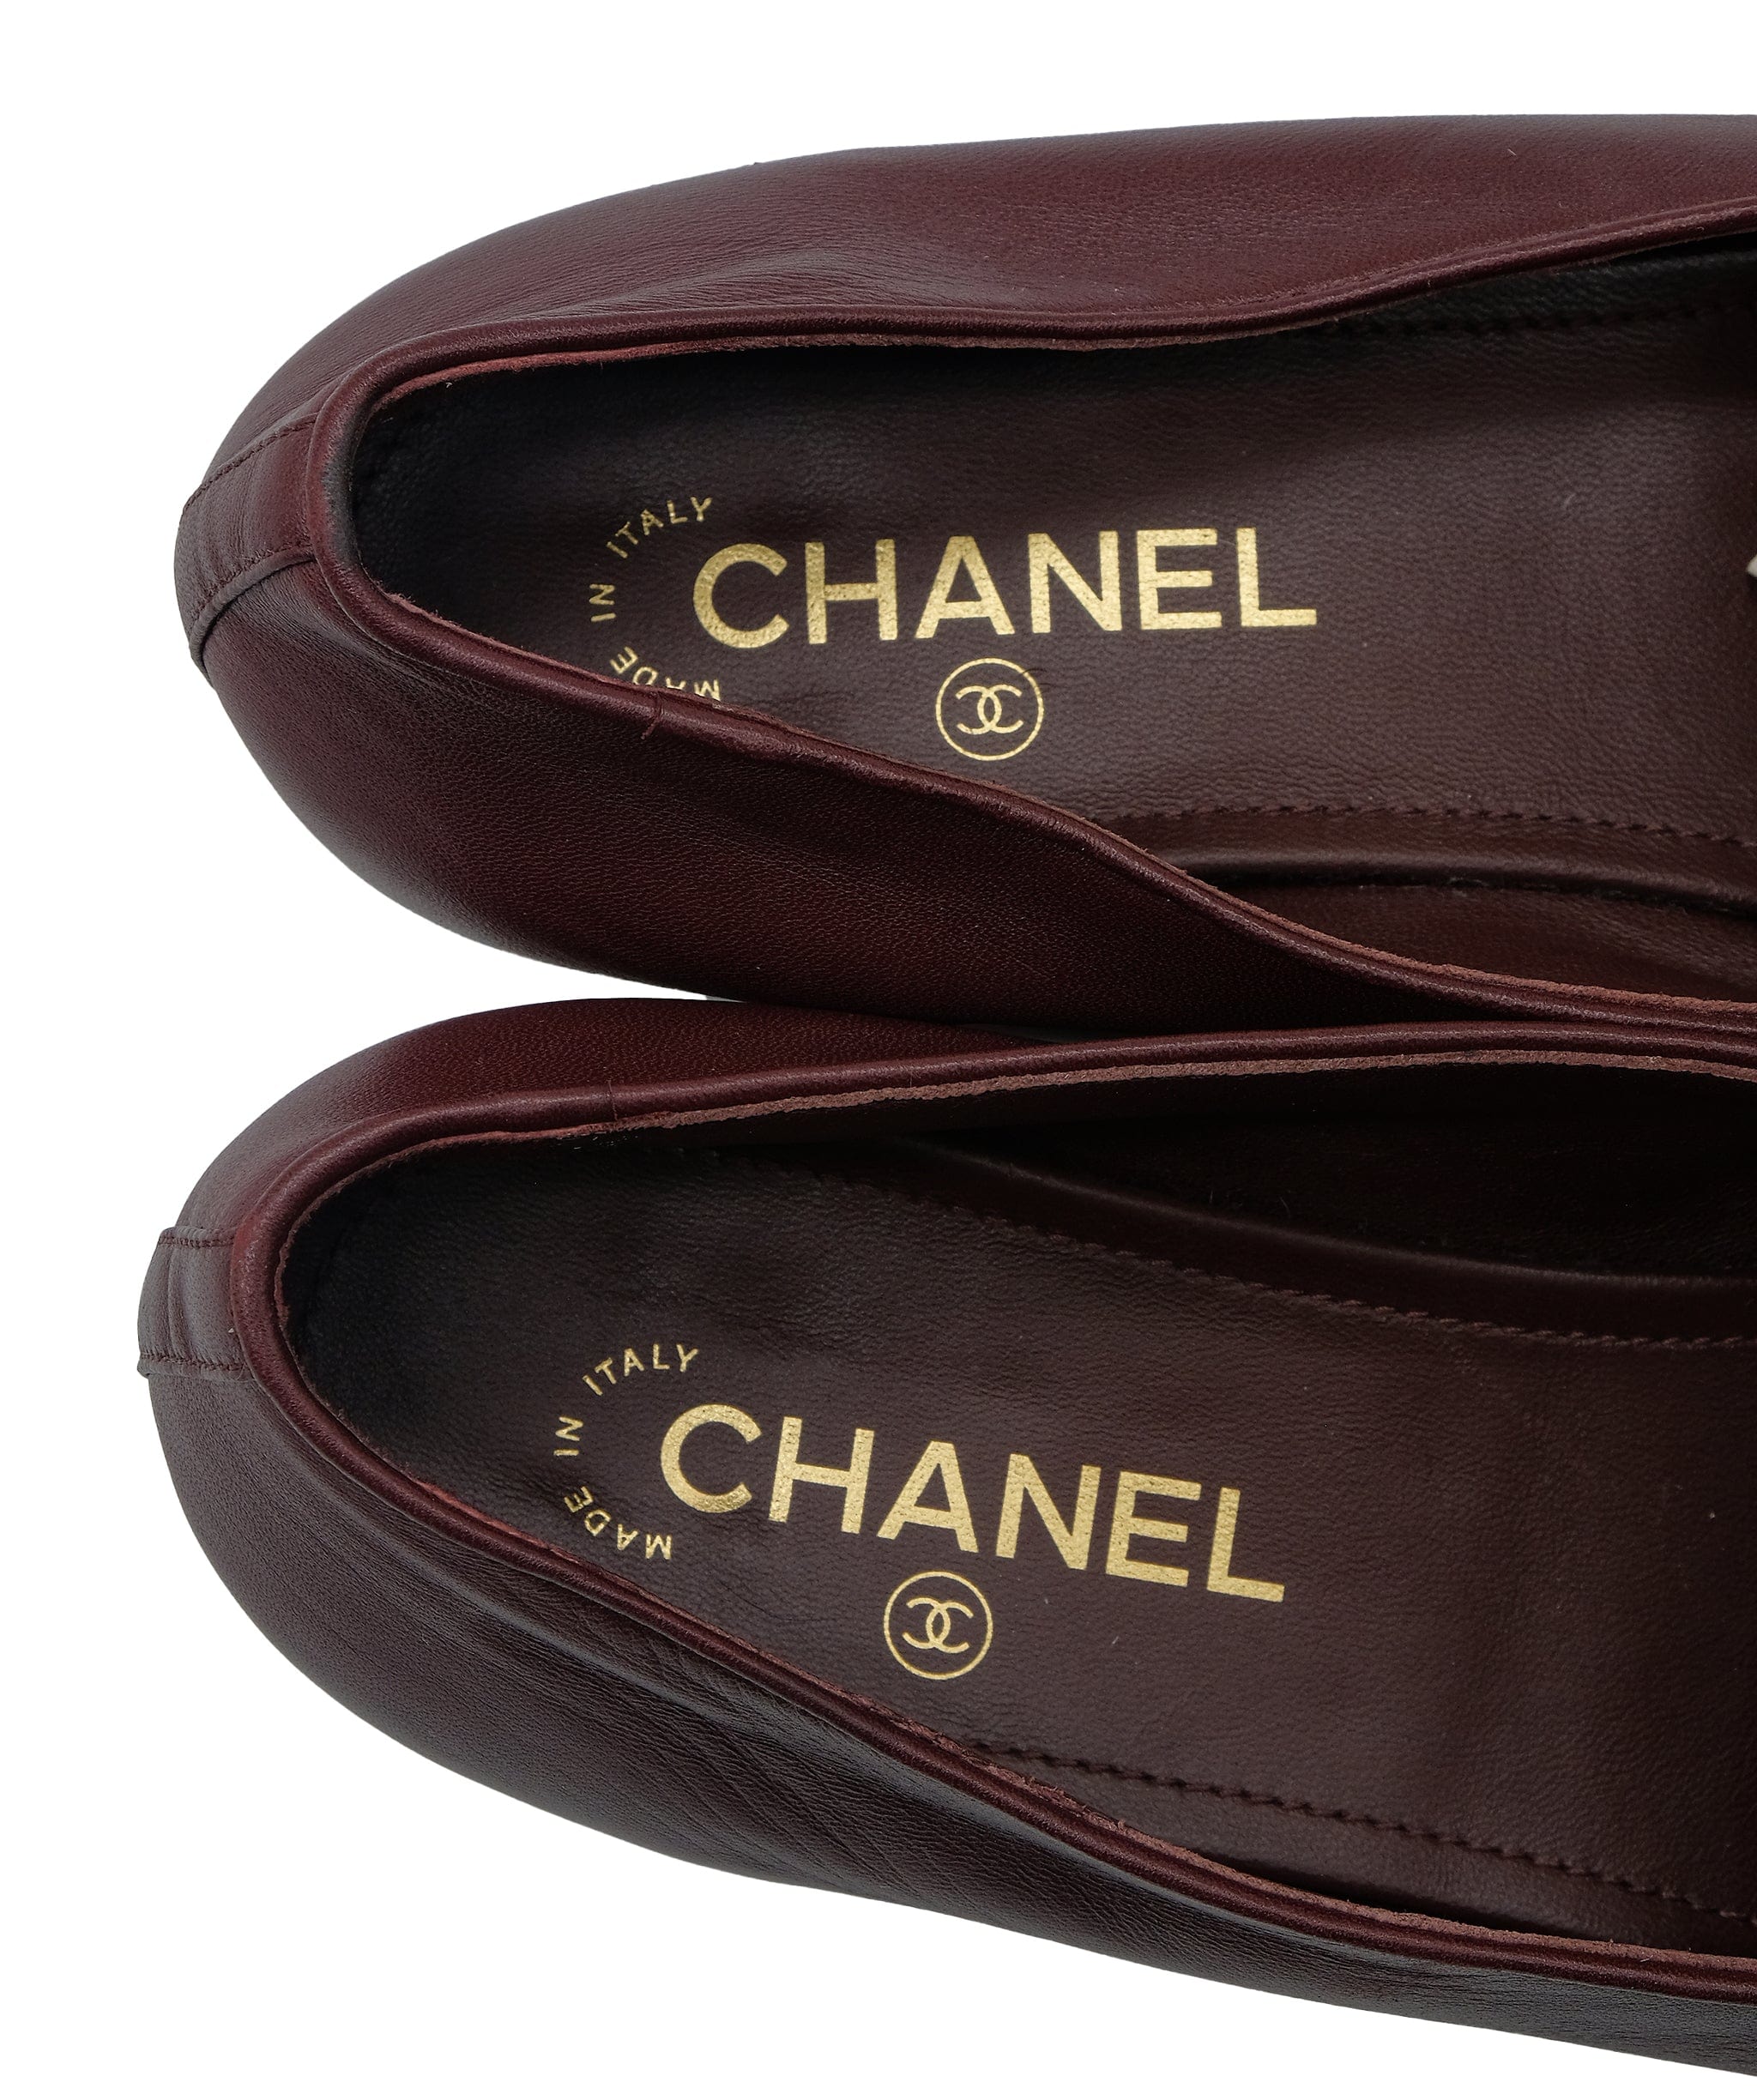 Chanel Chanel Burgundy Shoes 40